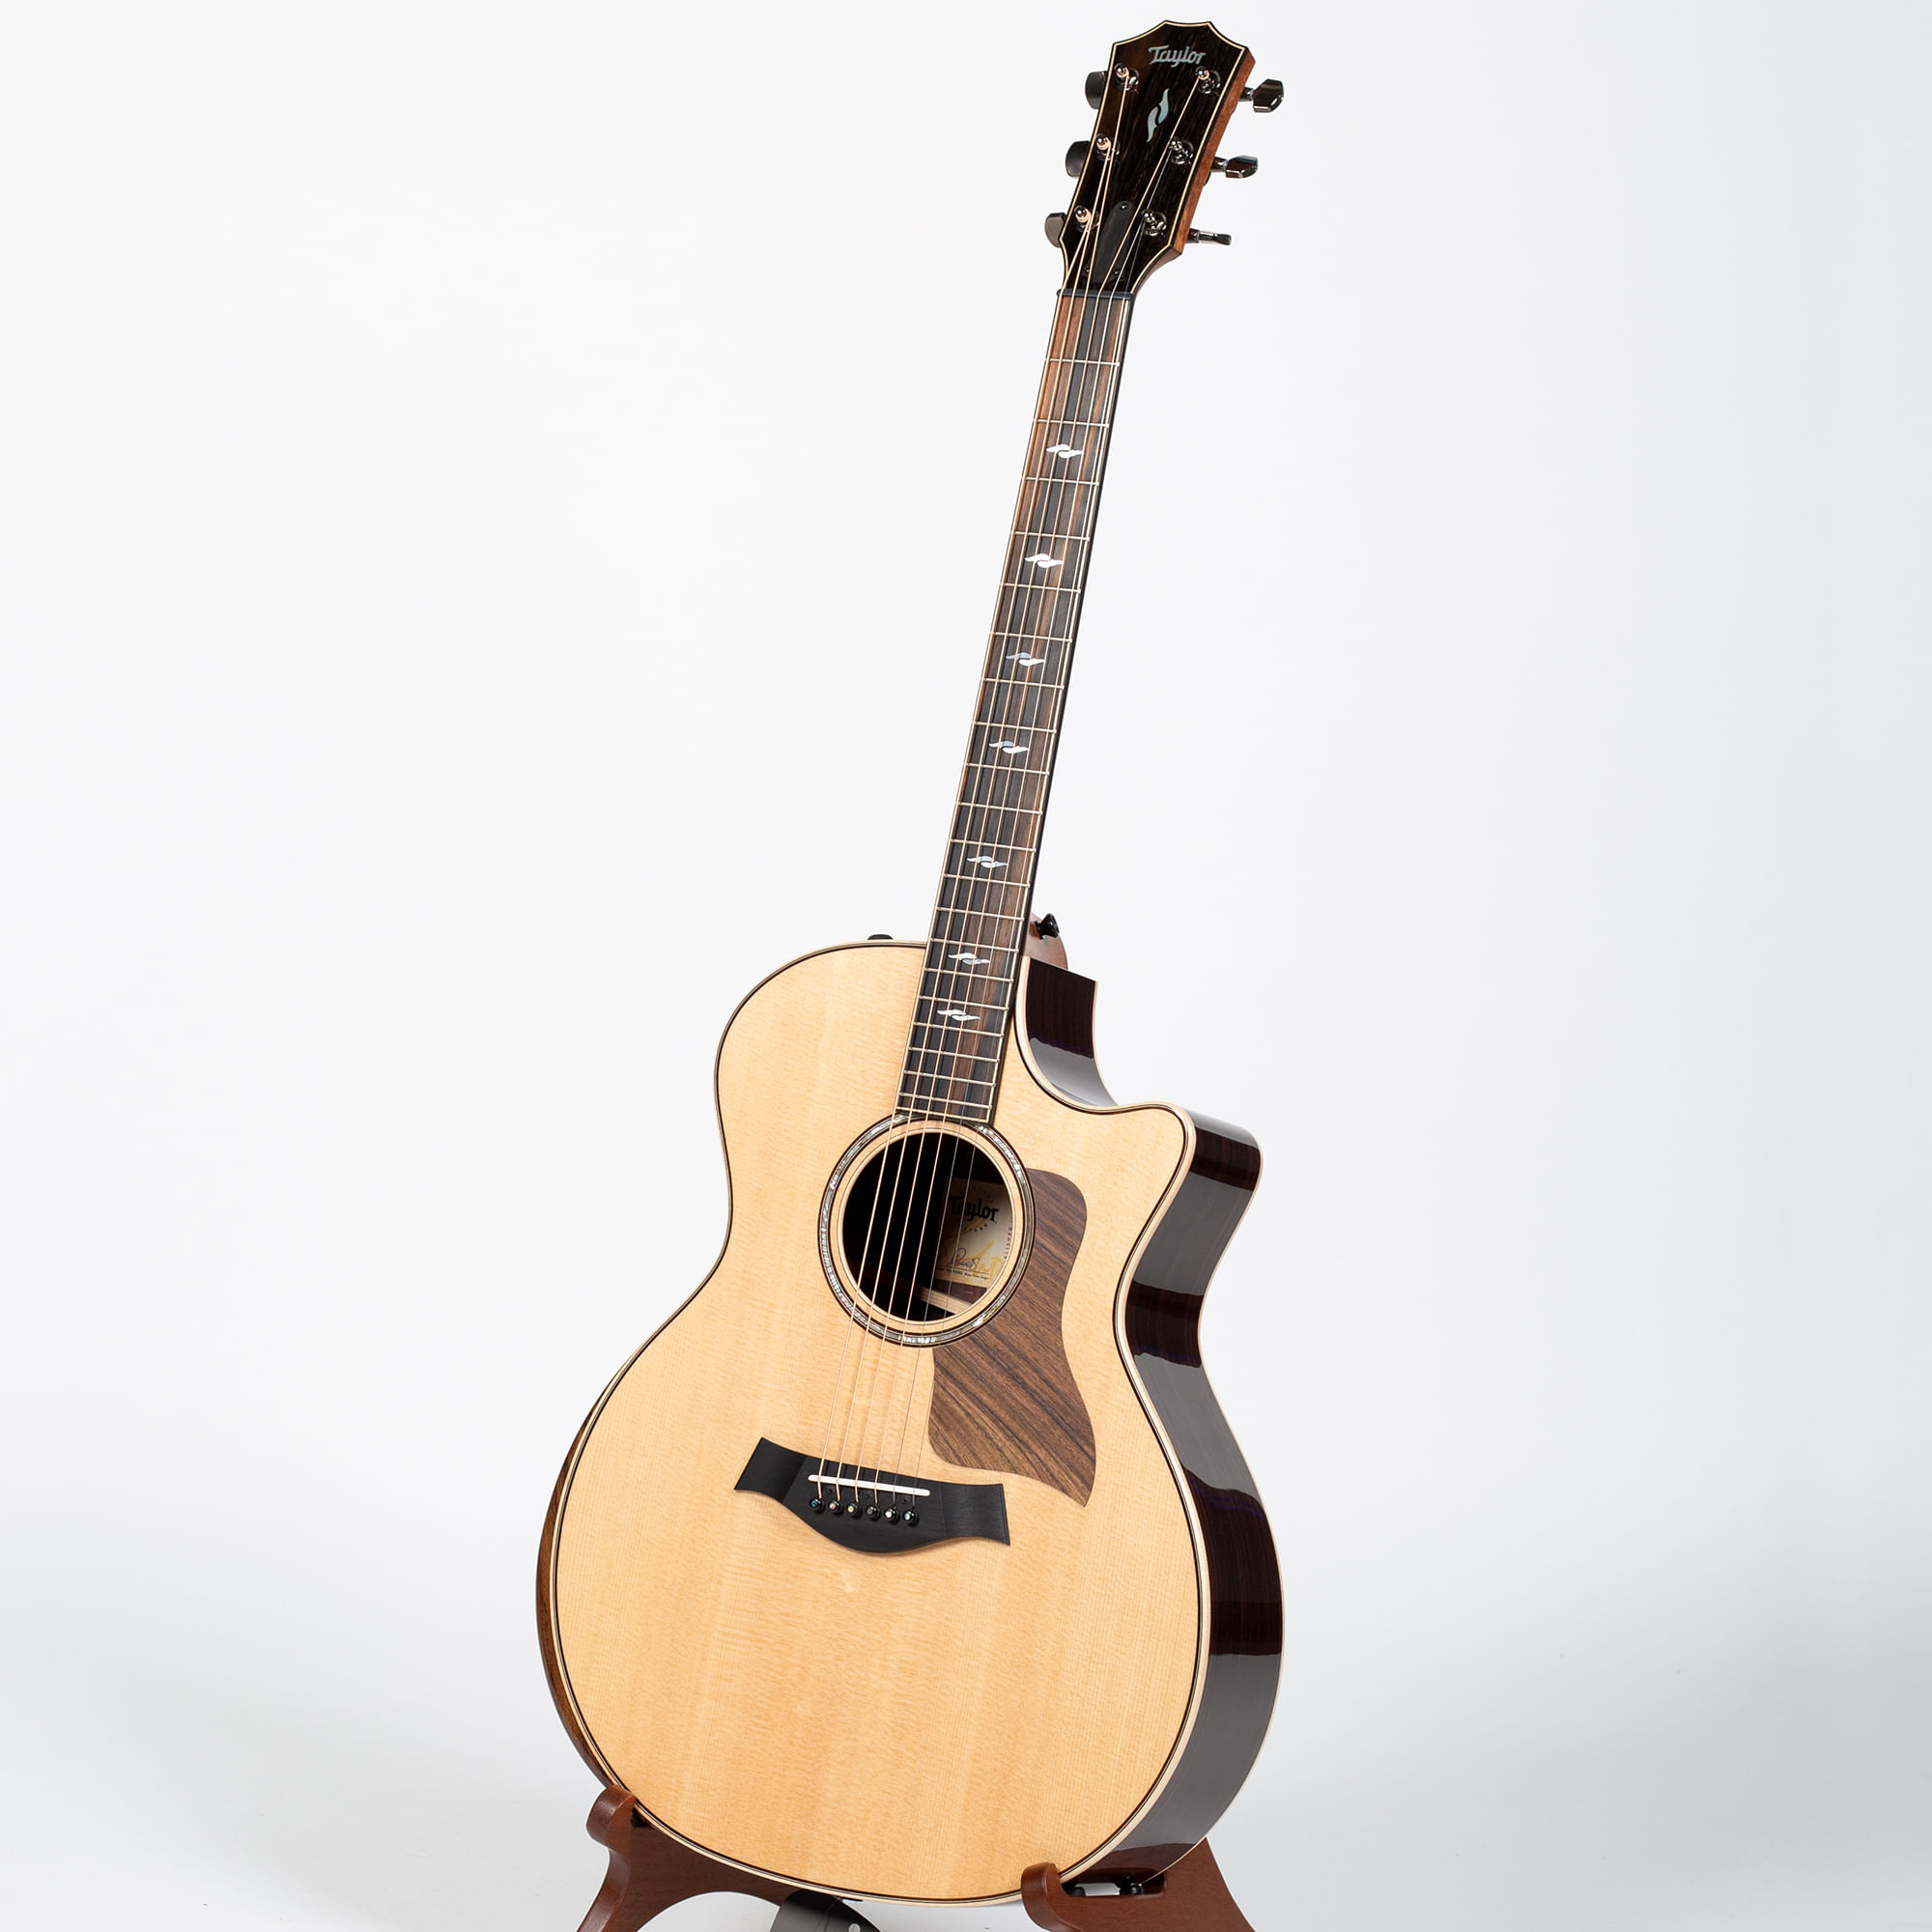 Taylor 814ce - Sitka Spruce / Indian Rosewood